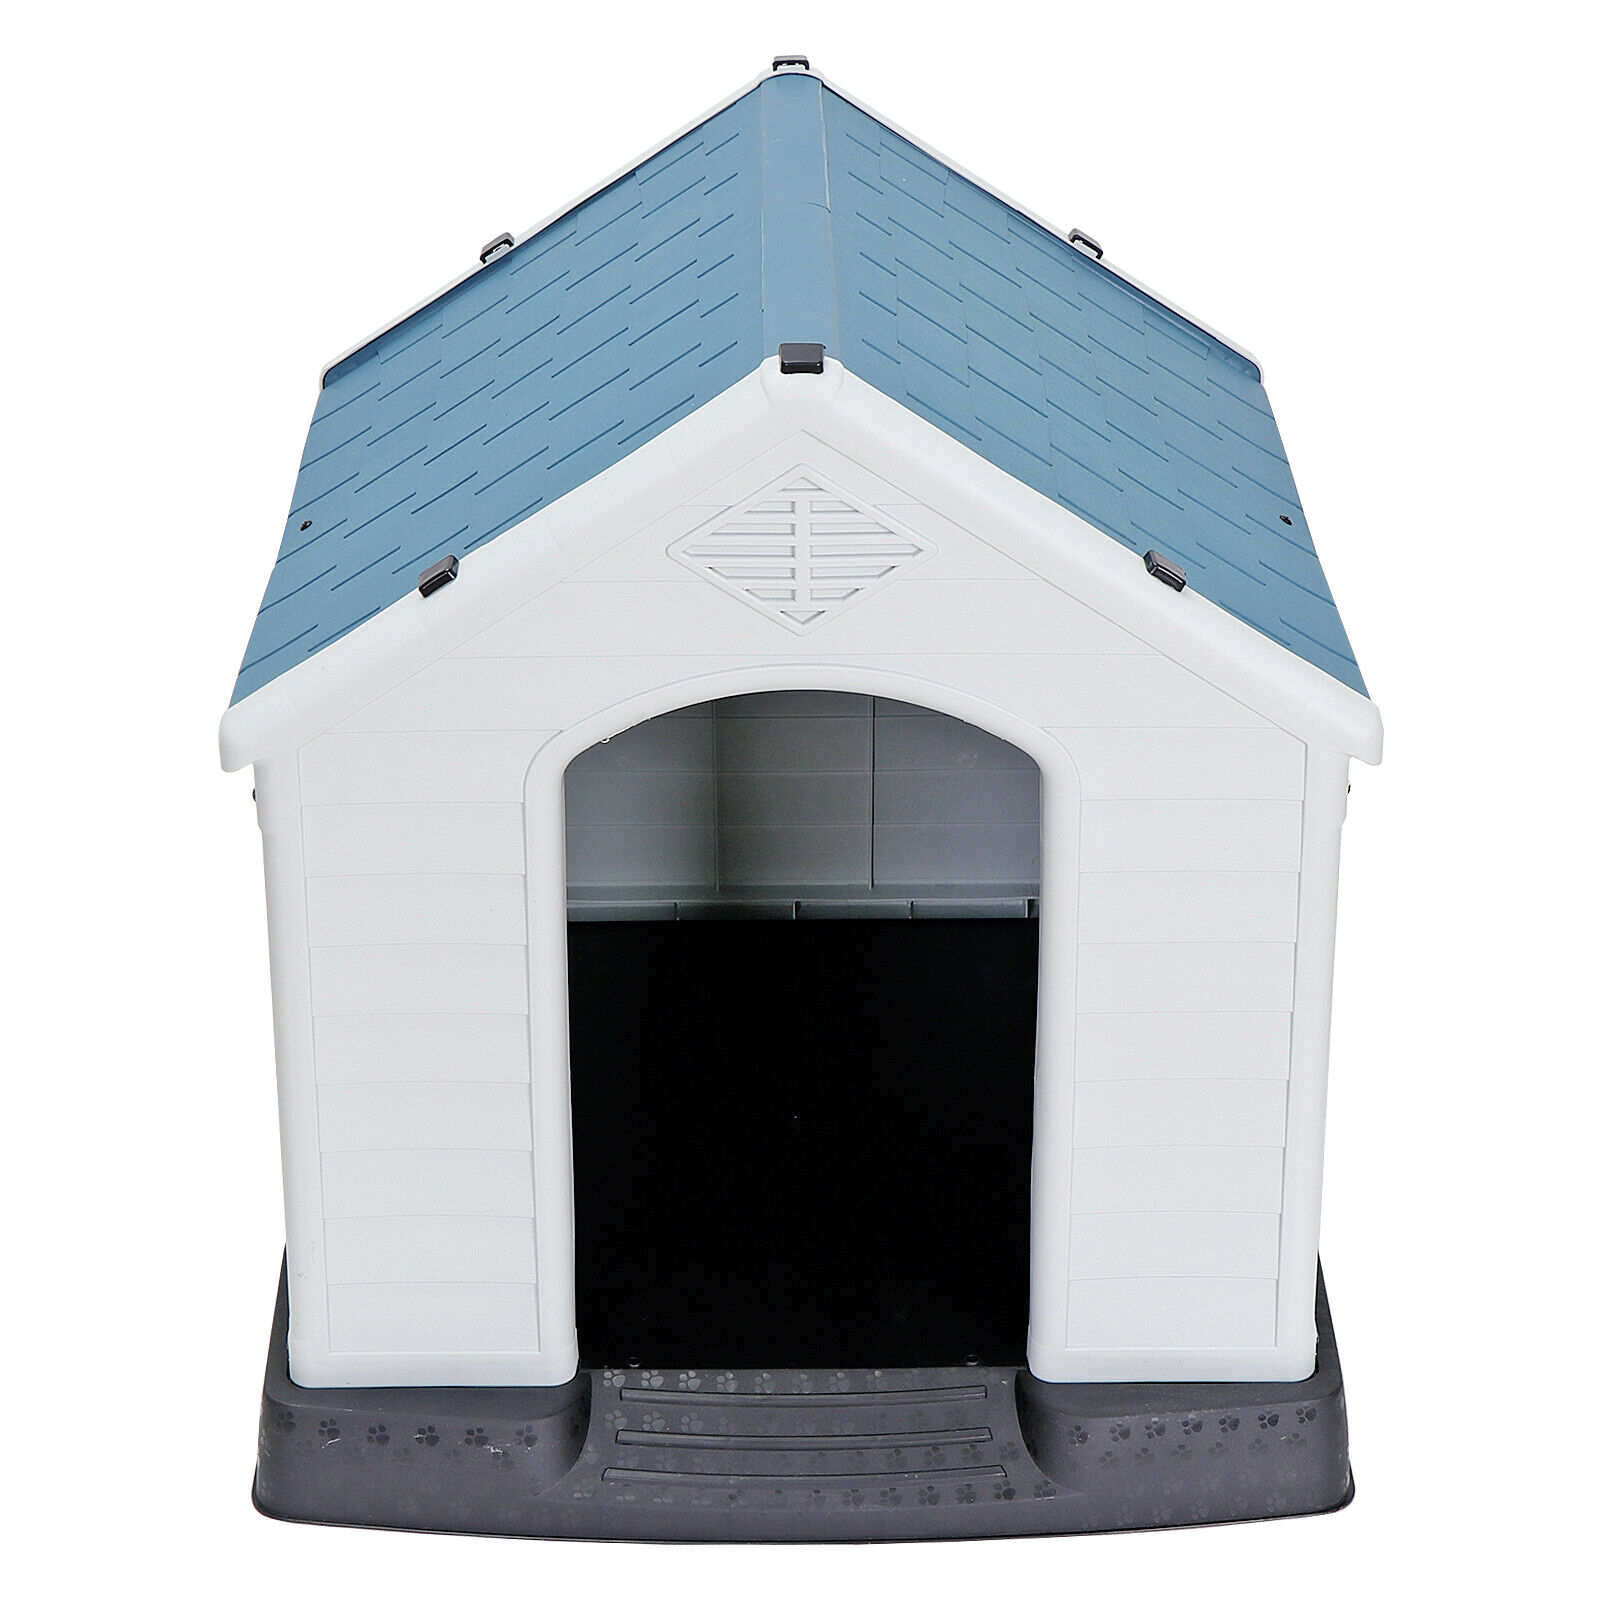 thinkstar 32" H Indoor Outdoor Dog Pet House With Elevated Floor And Air Vents, Blue White